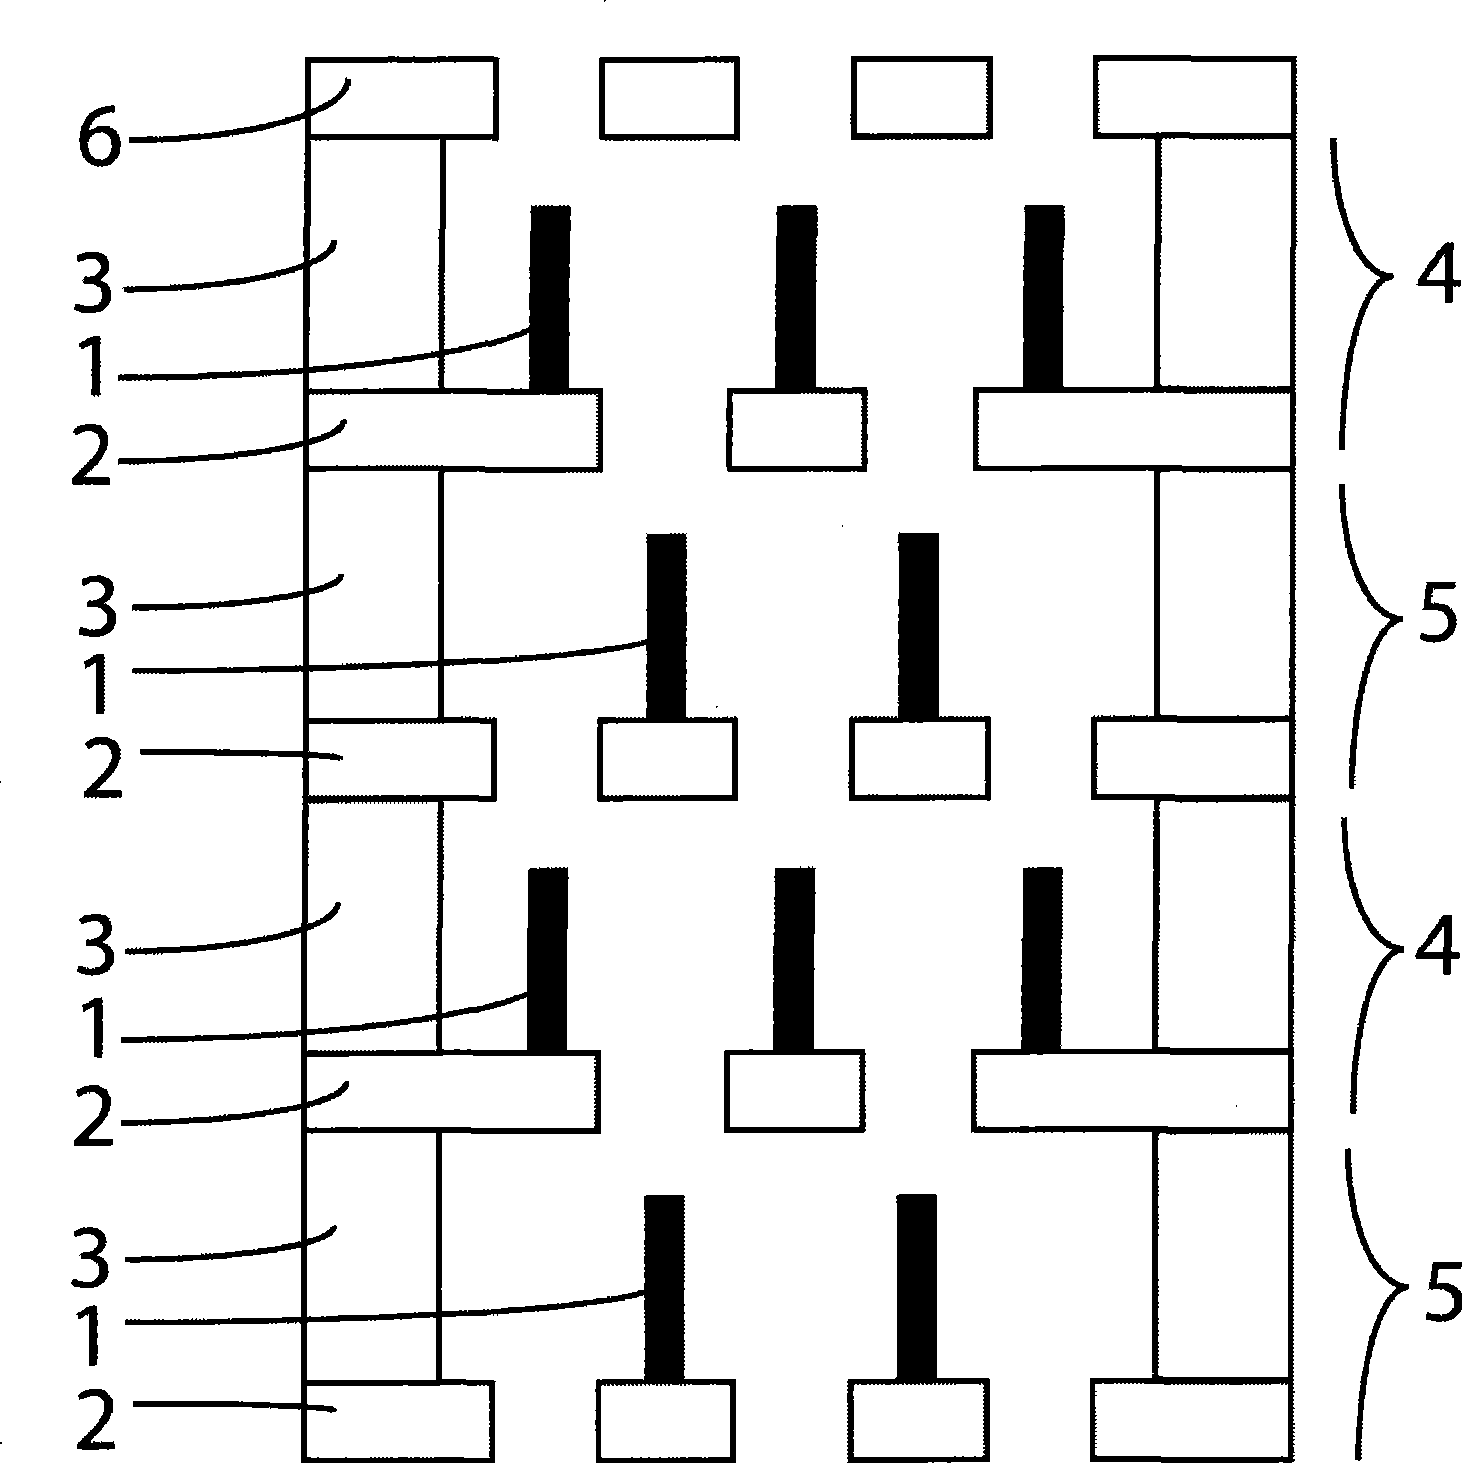 Multi-stag ion fluidizing device and method